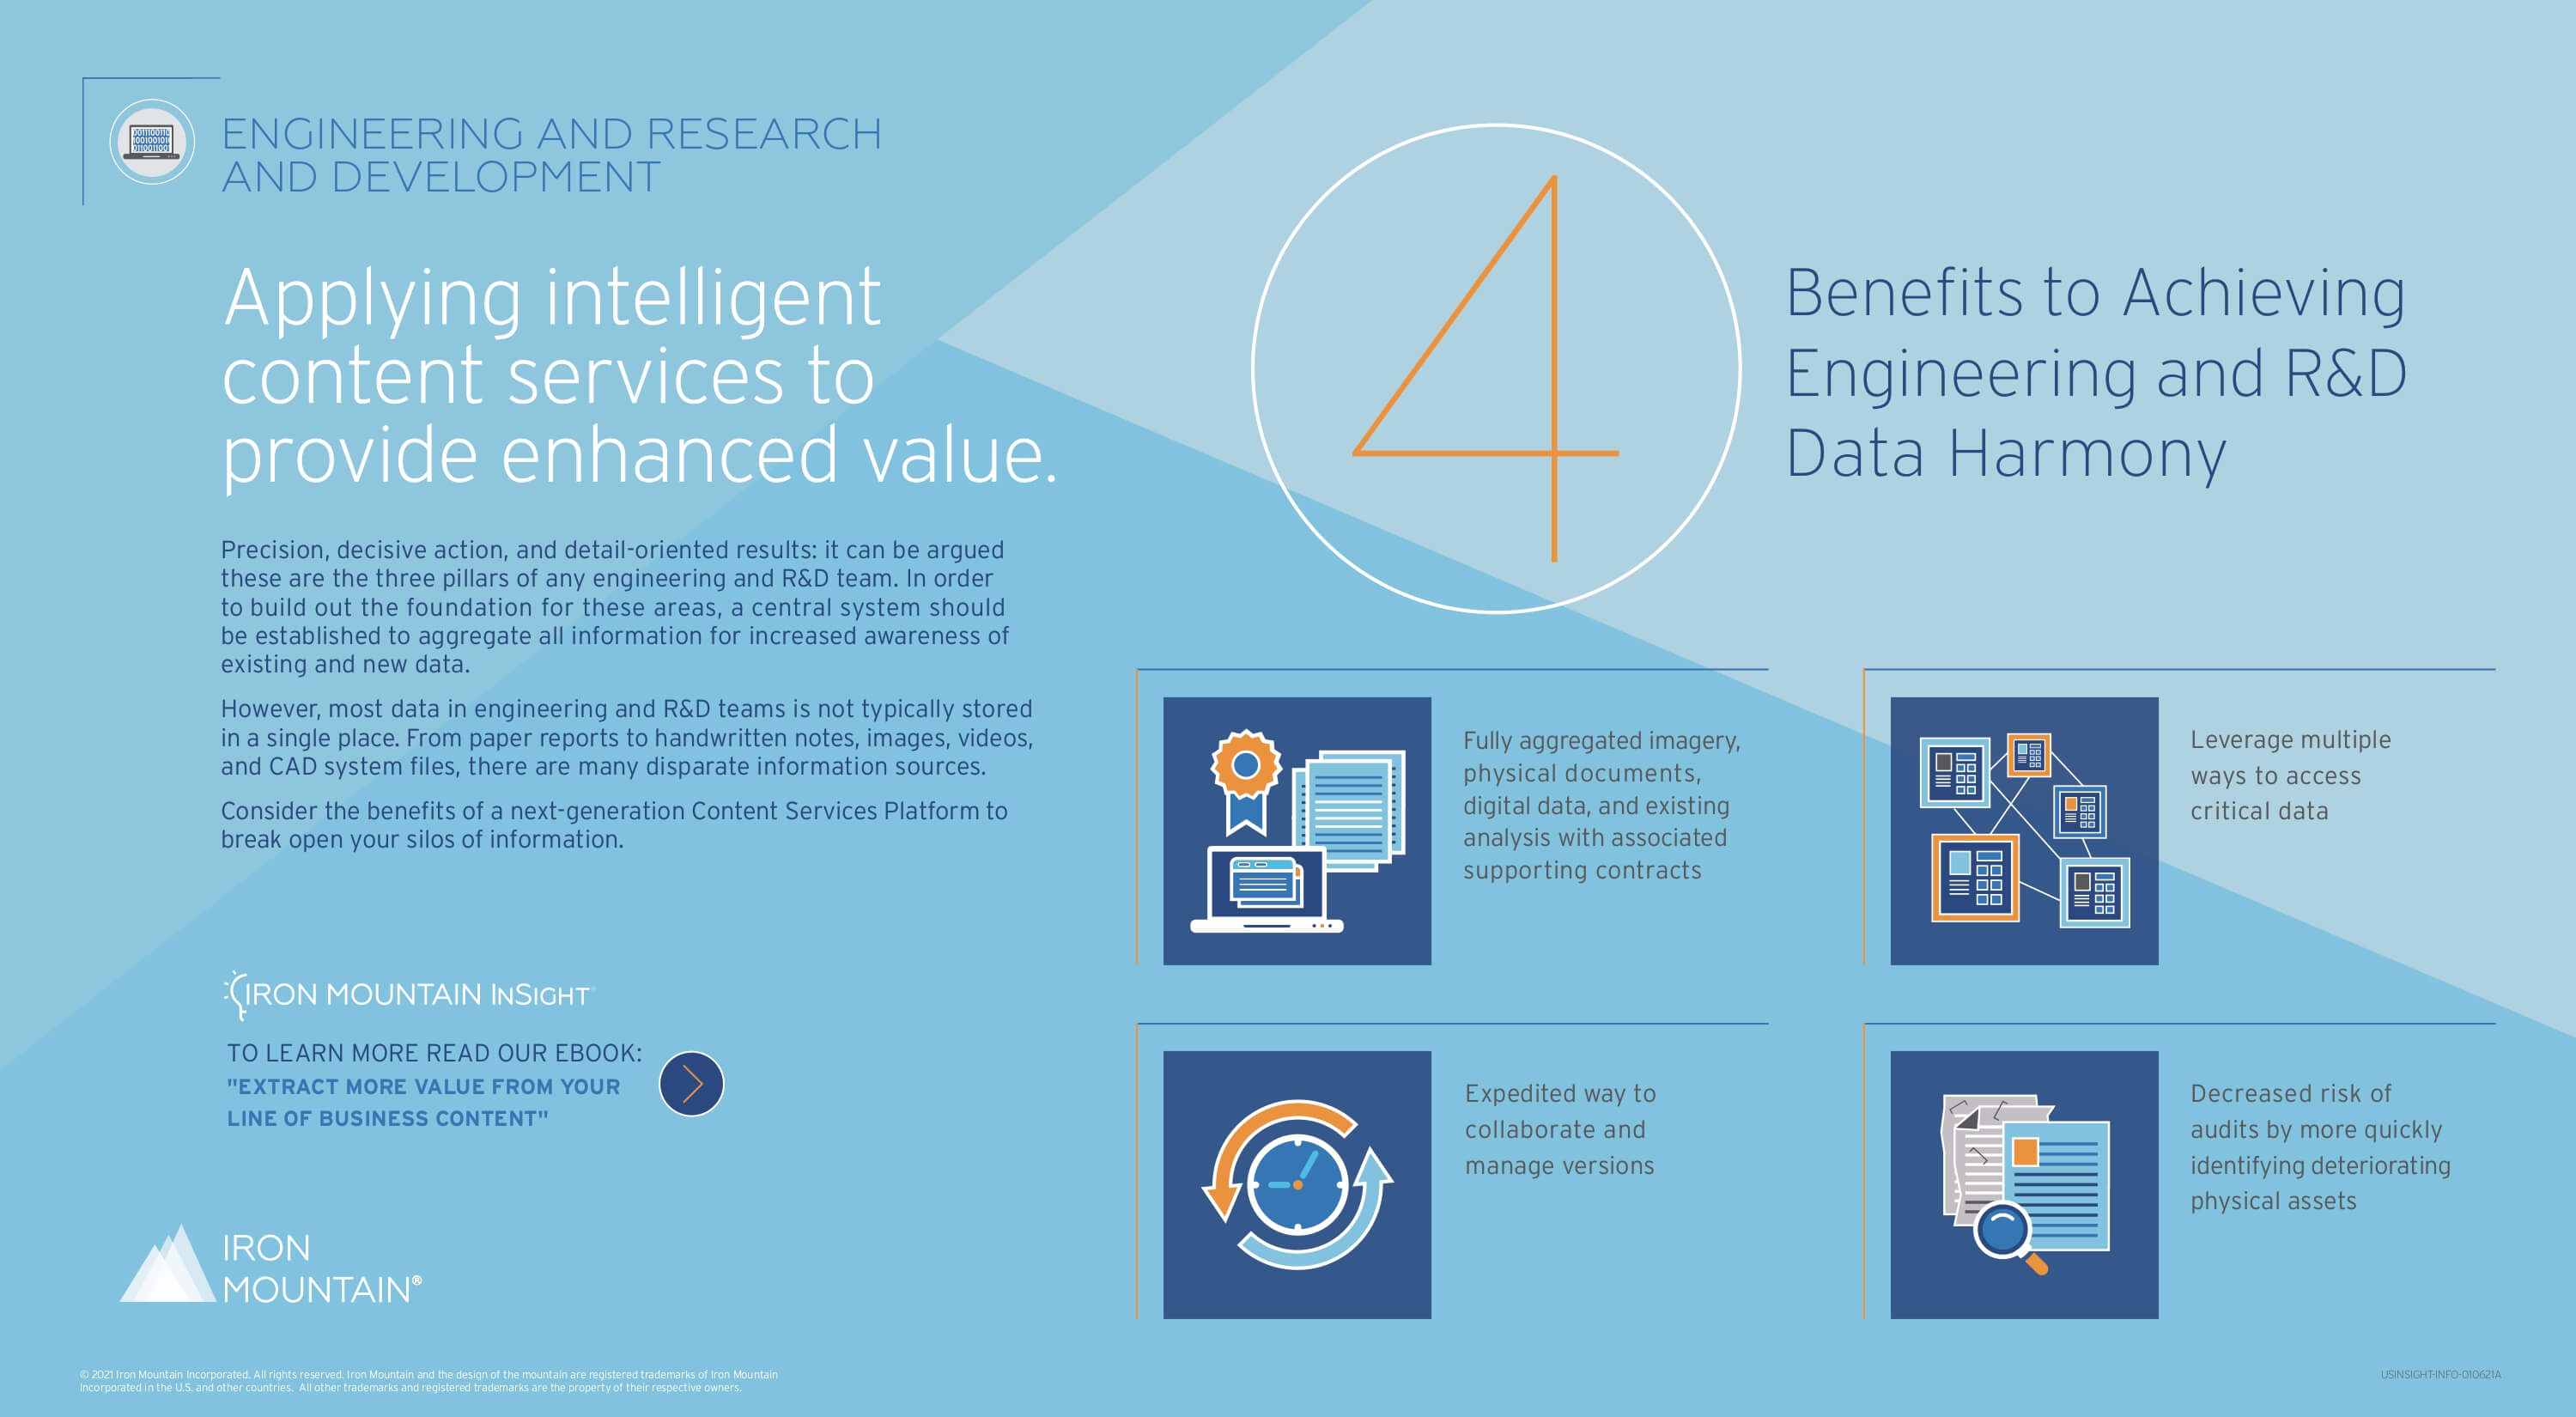 4 Benefits To Achieving Engineering And R&D Data Harmony